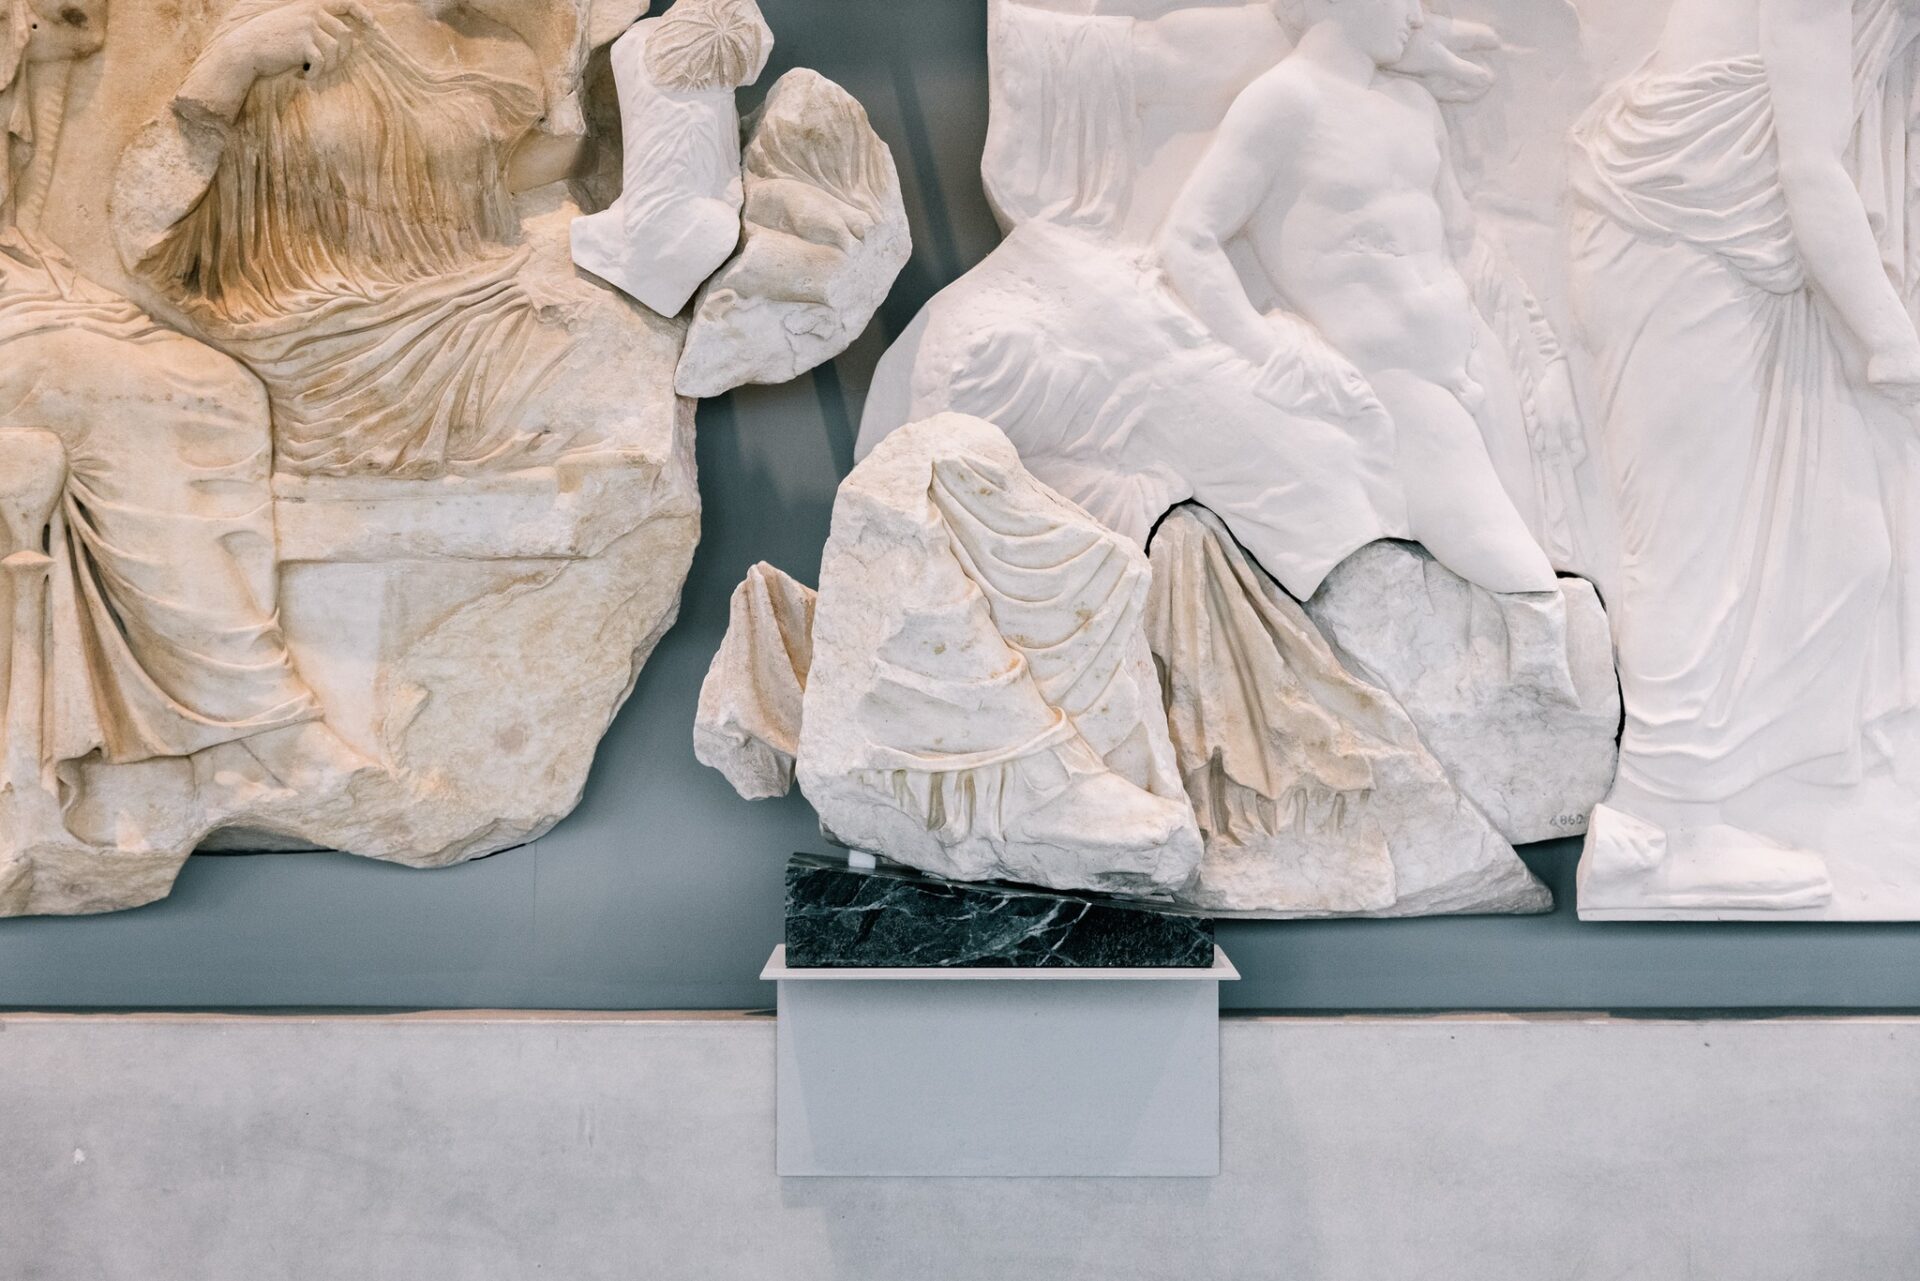 Insights Greece - Parthenon Fragment Returned from Sicily, Now on Display at Acropolis Museum